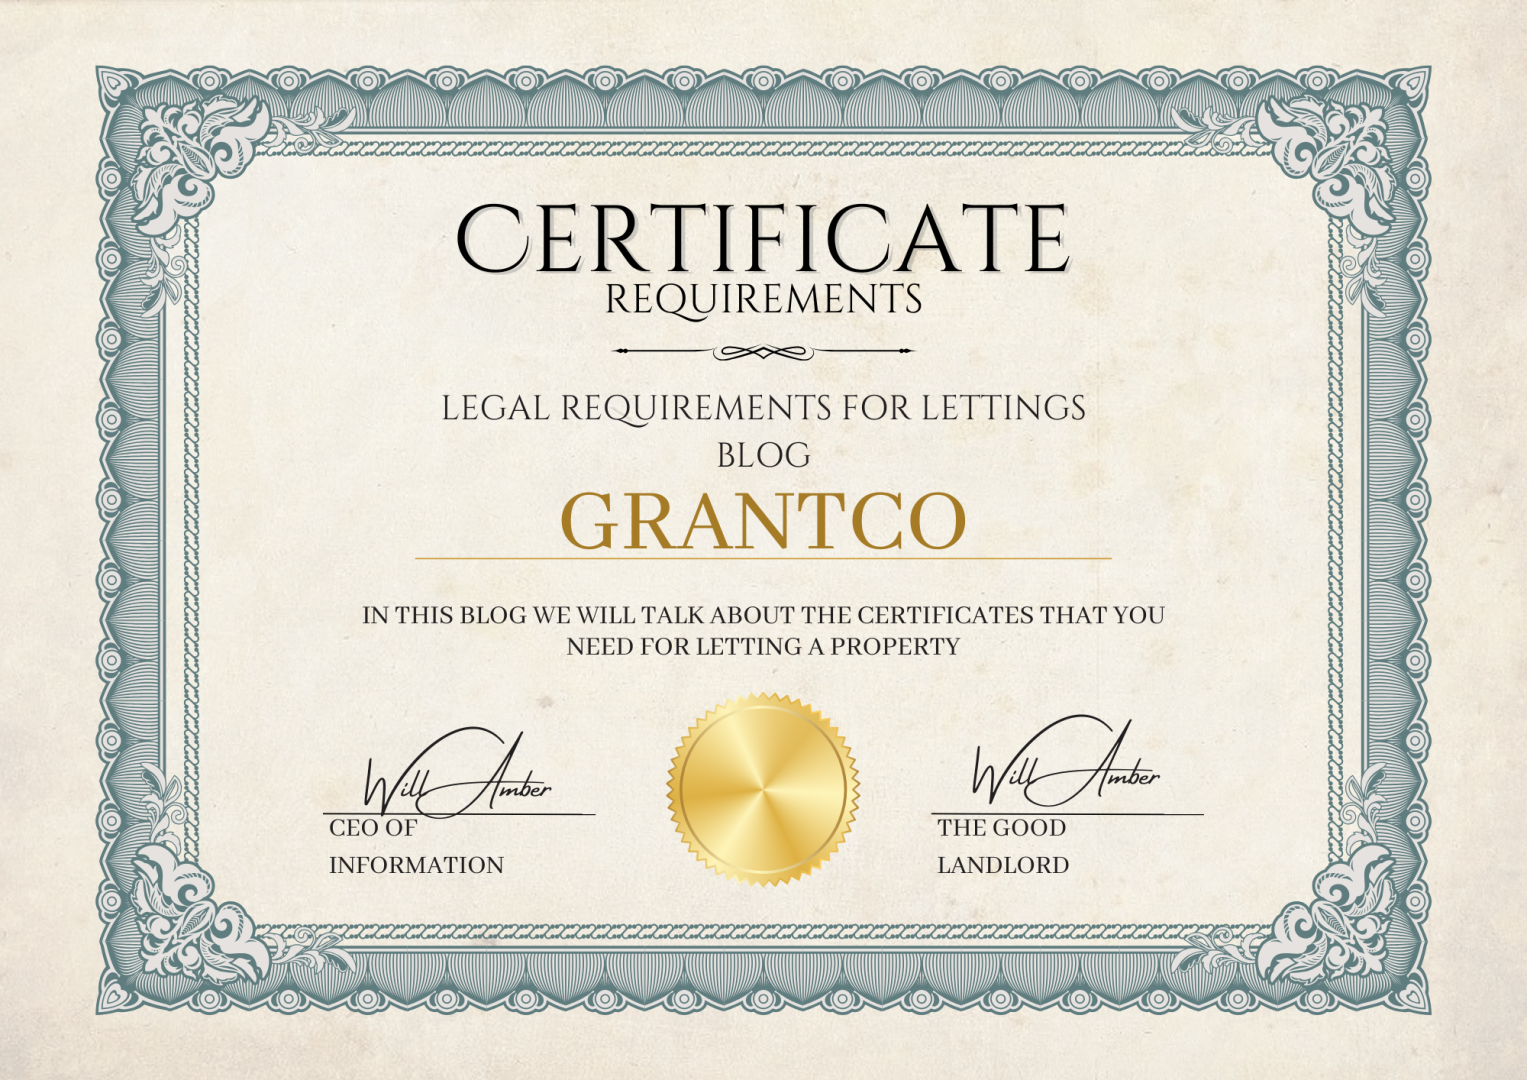 Information on certificates for letting.